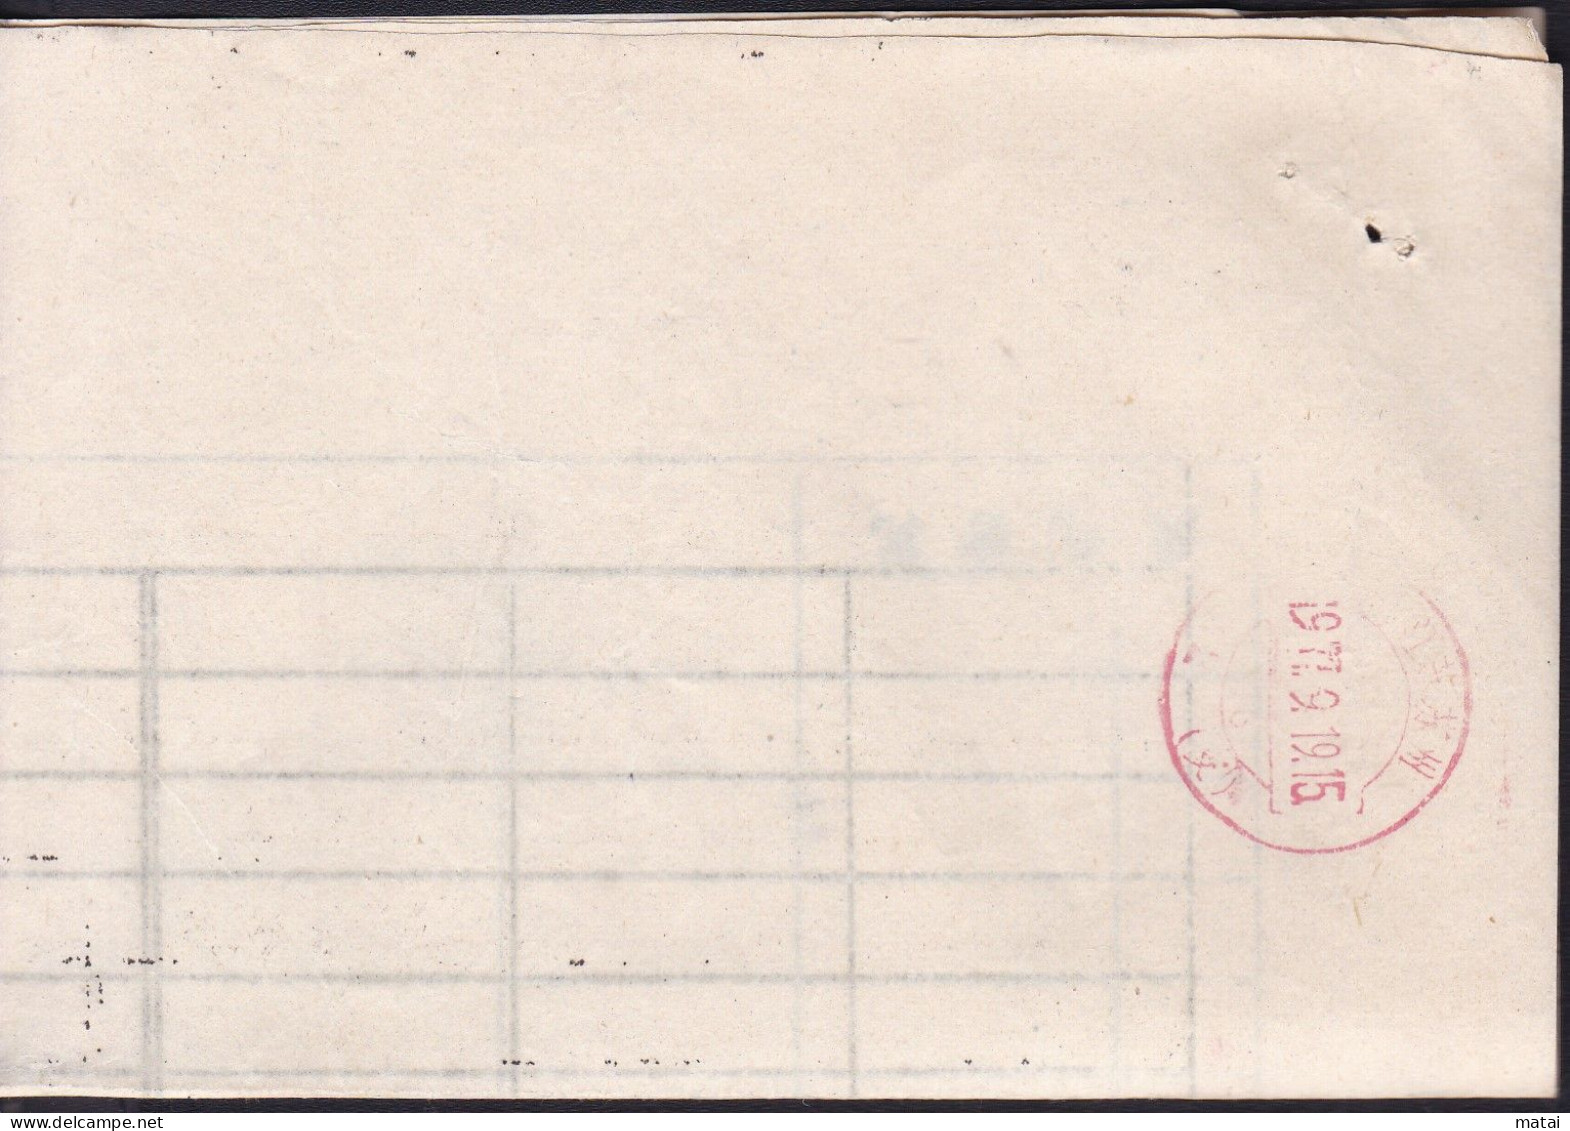 CHINA CHINE 1971 SUZHOU TO SUZHOU Seismological Bureau COVER Observation Records Of Water Wells WITH 1.5 F STAMP - Brieven En Documenten